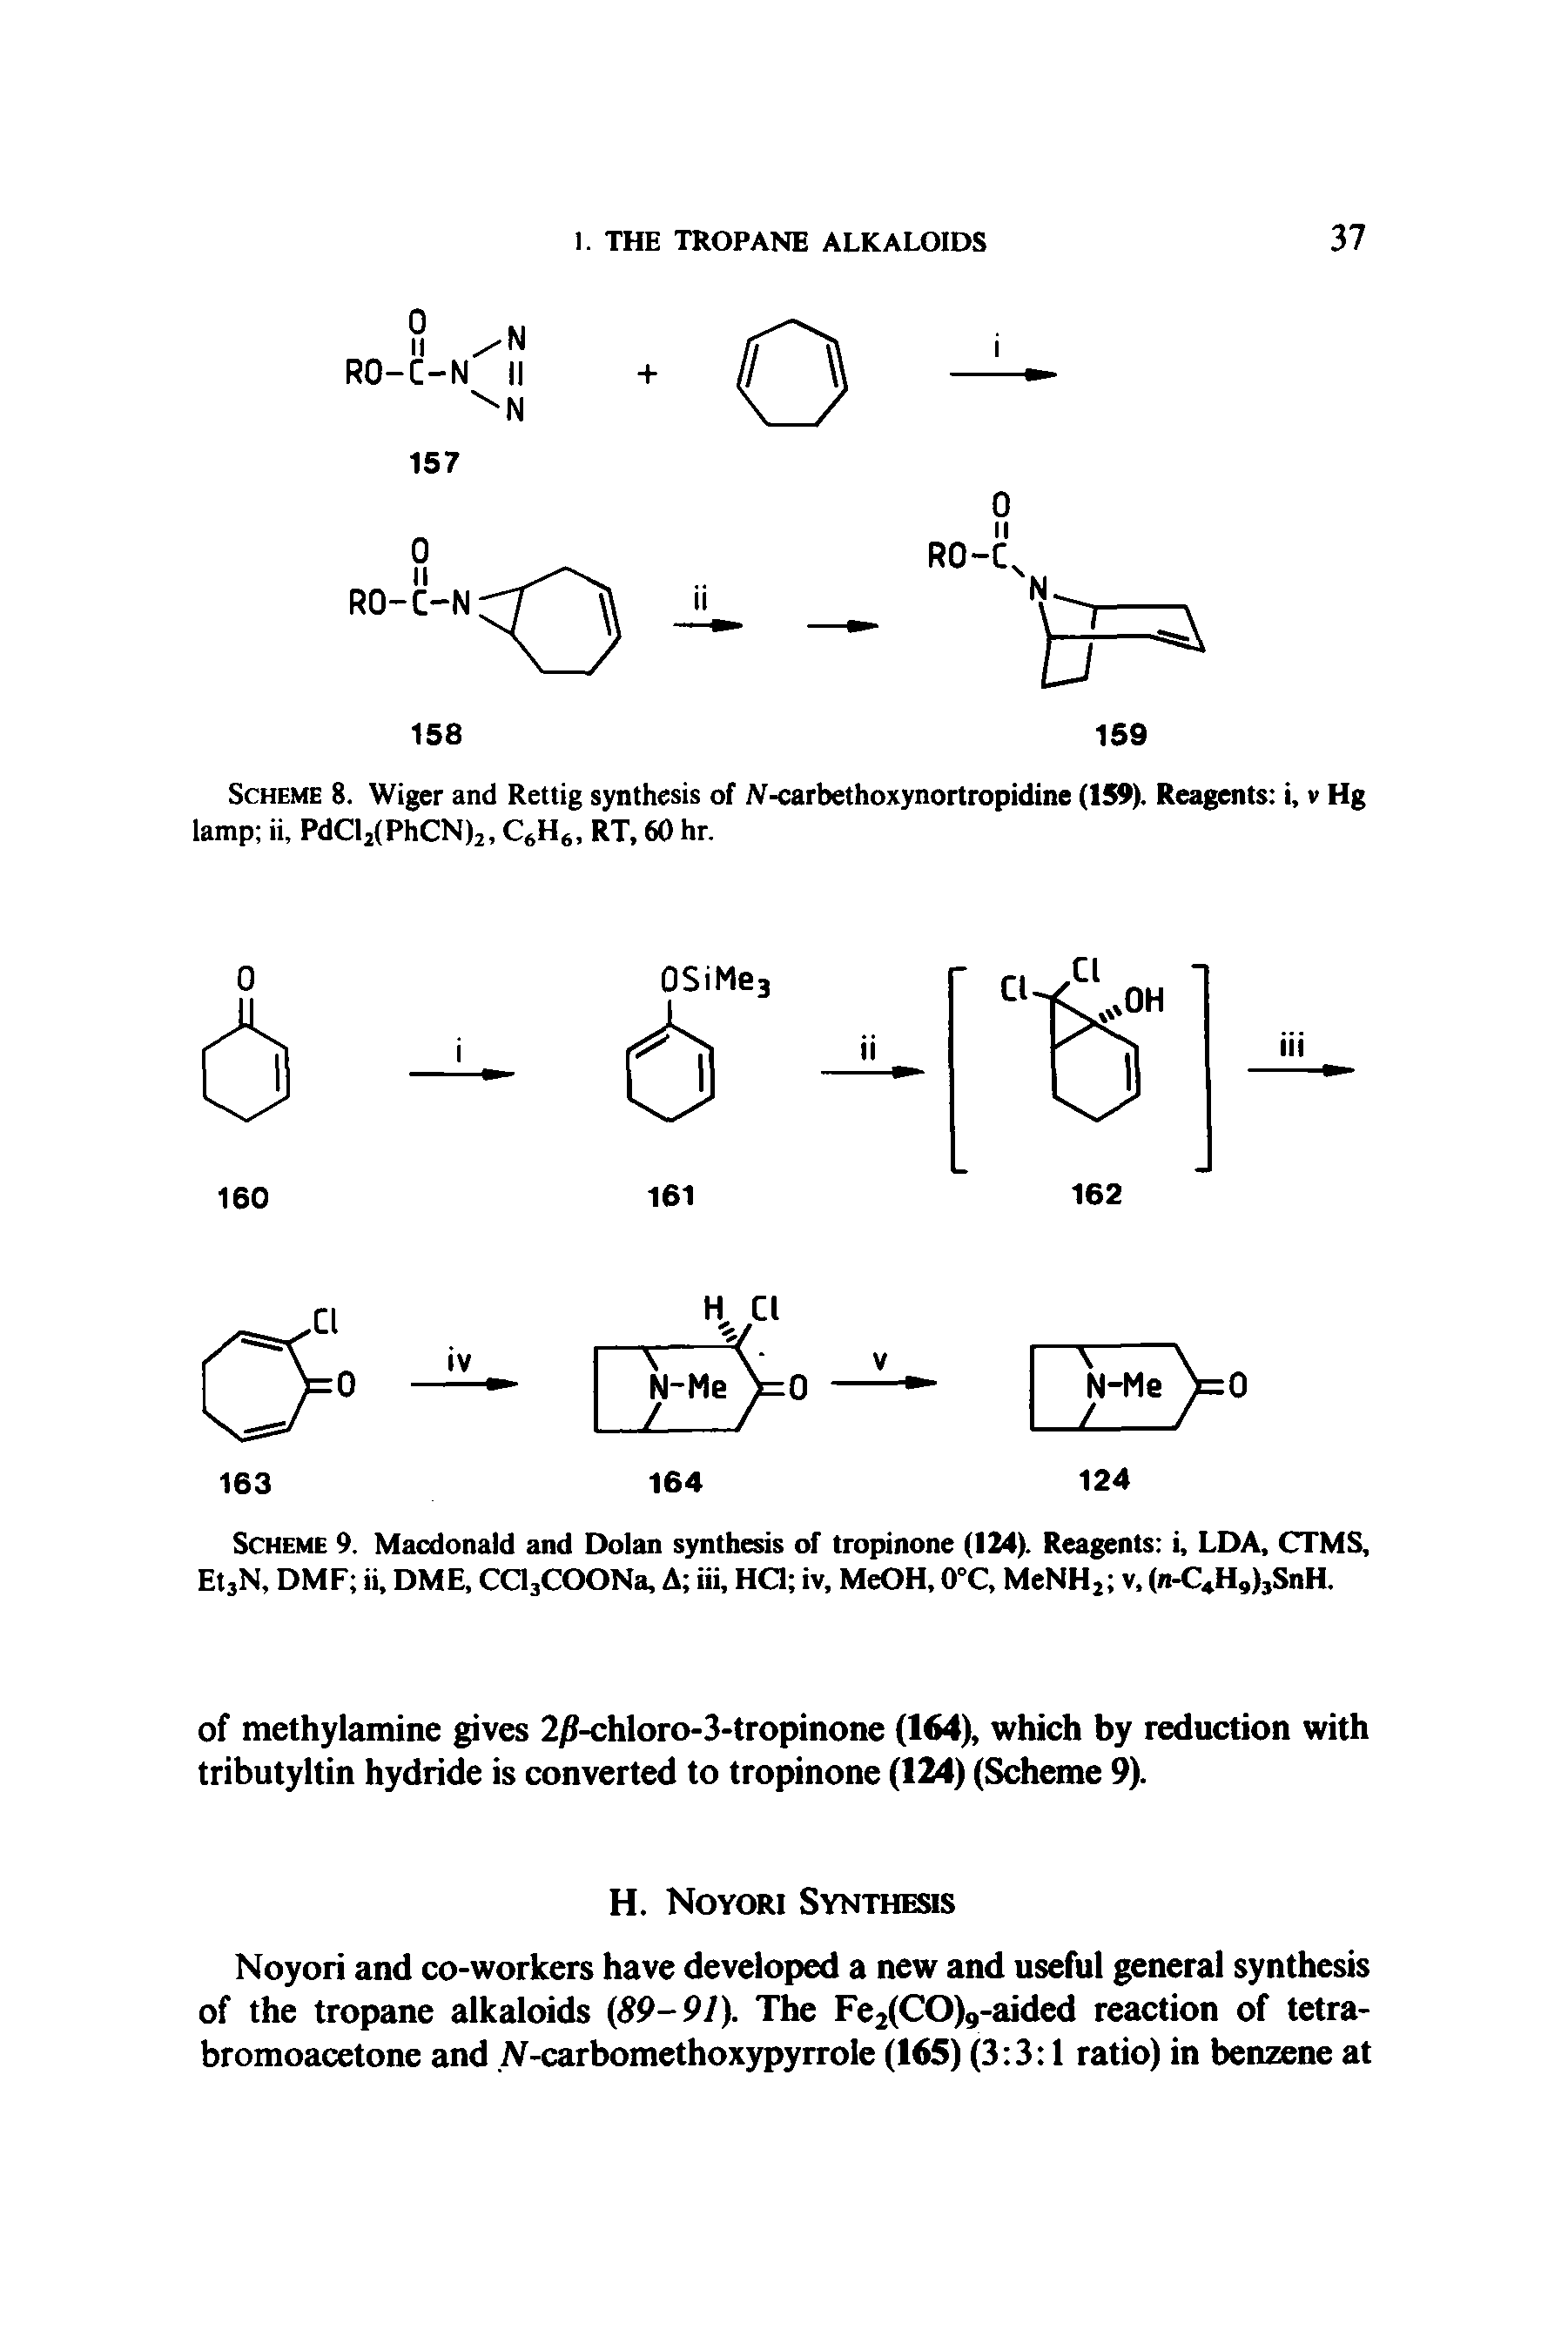 Scheme 9. Macdonald and Dolan synthesis of tropinone (124). Reagents i, LDA, CTMS, Et3N, DMF ii, DME, CCl3COONa, A iii, HQ iv, MeOH, 0°C, MeNH2 v, (n-C H9)3SnH.